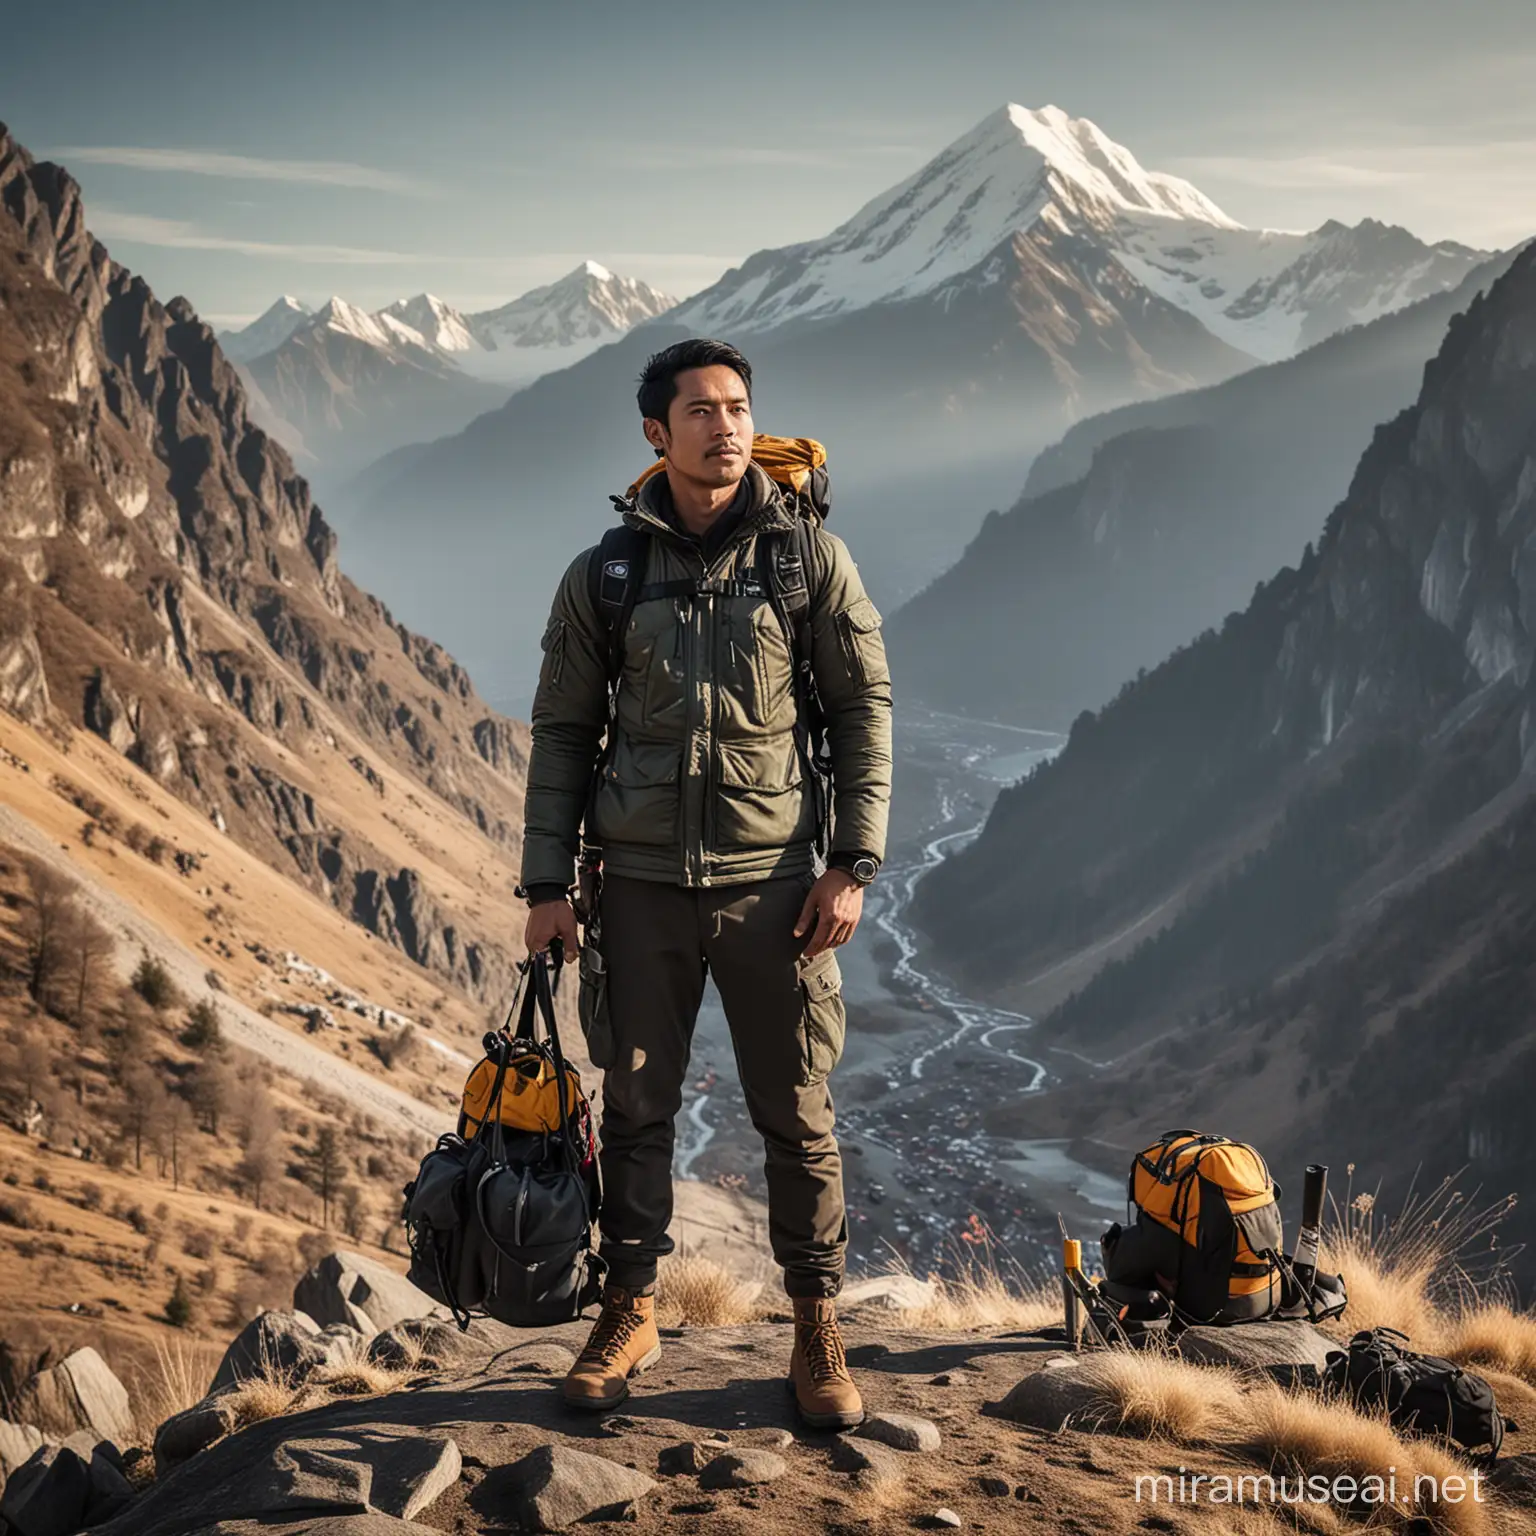 Handsome Indonesian Mountaineer with Backpack in Scenic Mountain Landscape